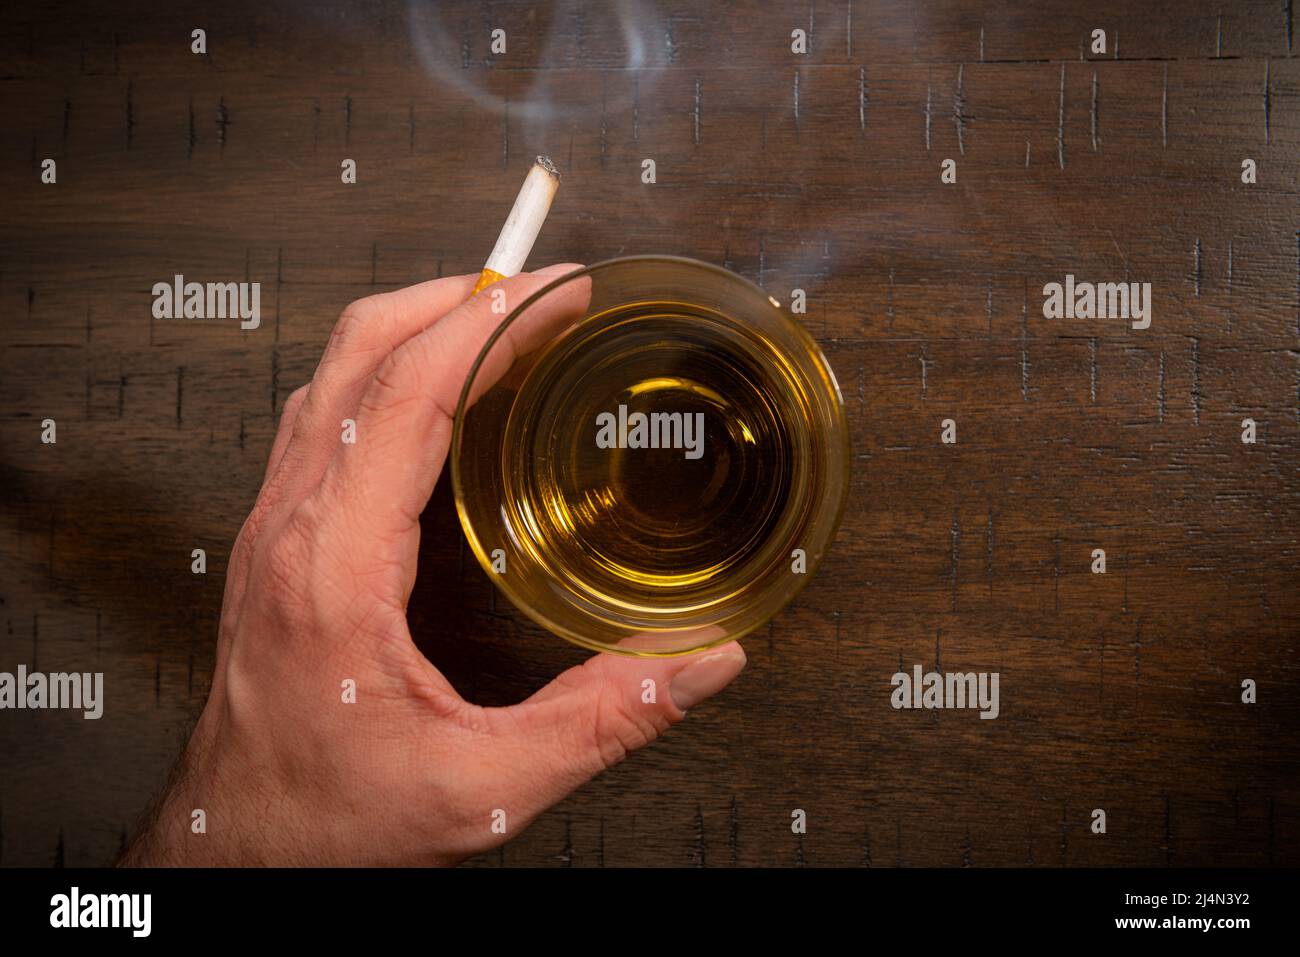 A male caucasian hand holds a smoking cigarette near a glass of whiskey. Stock Photo